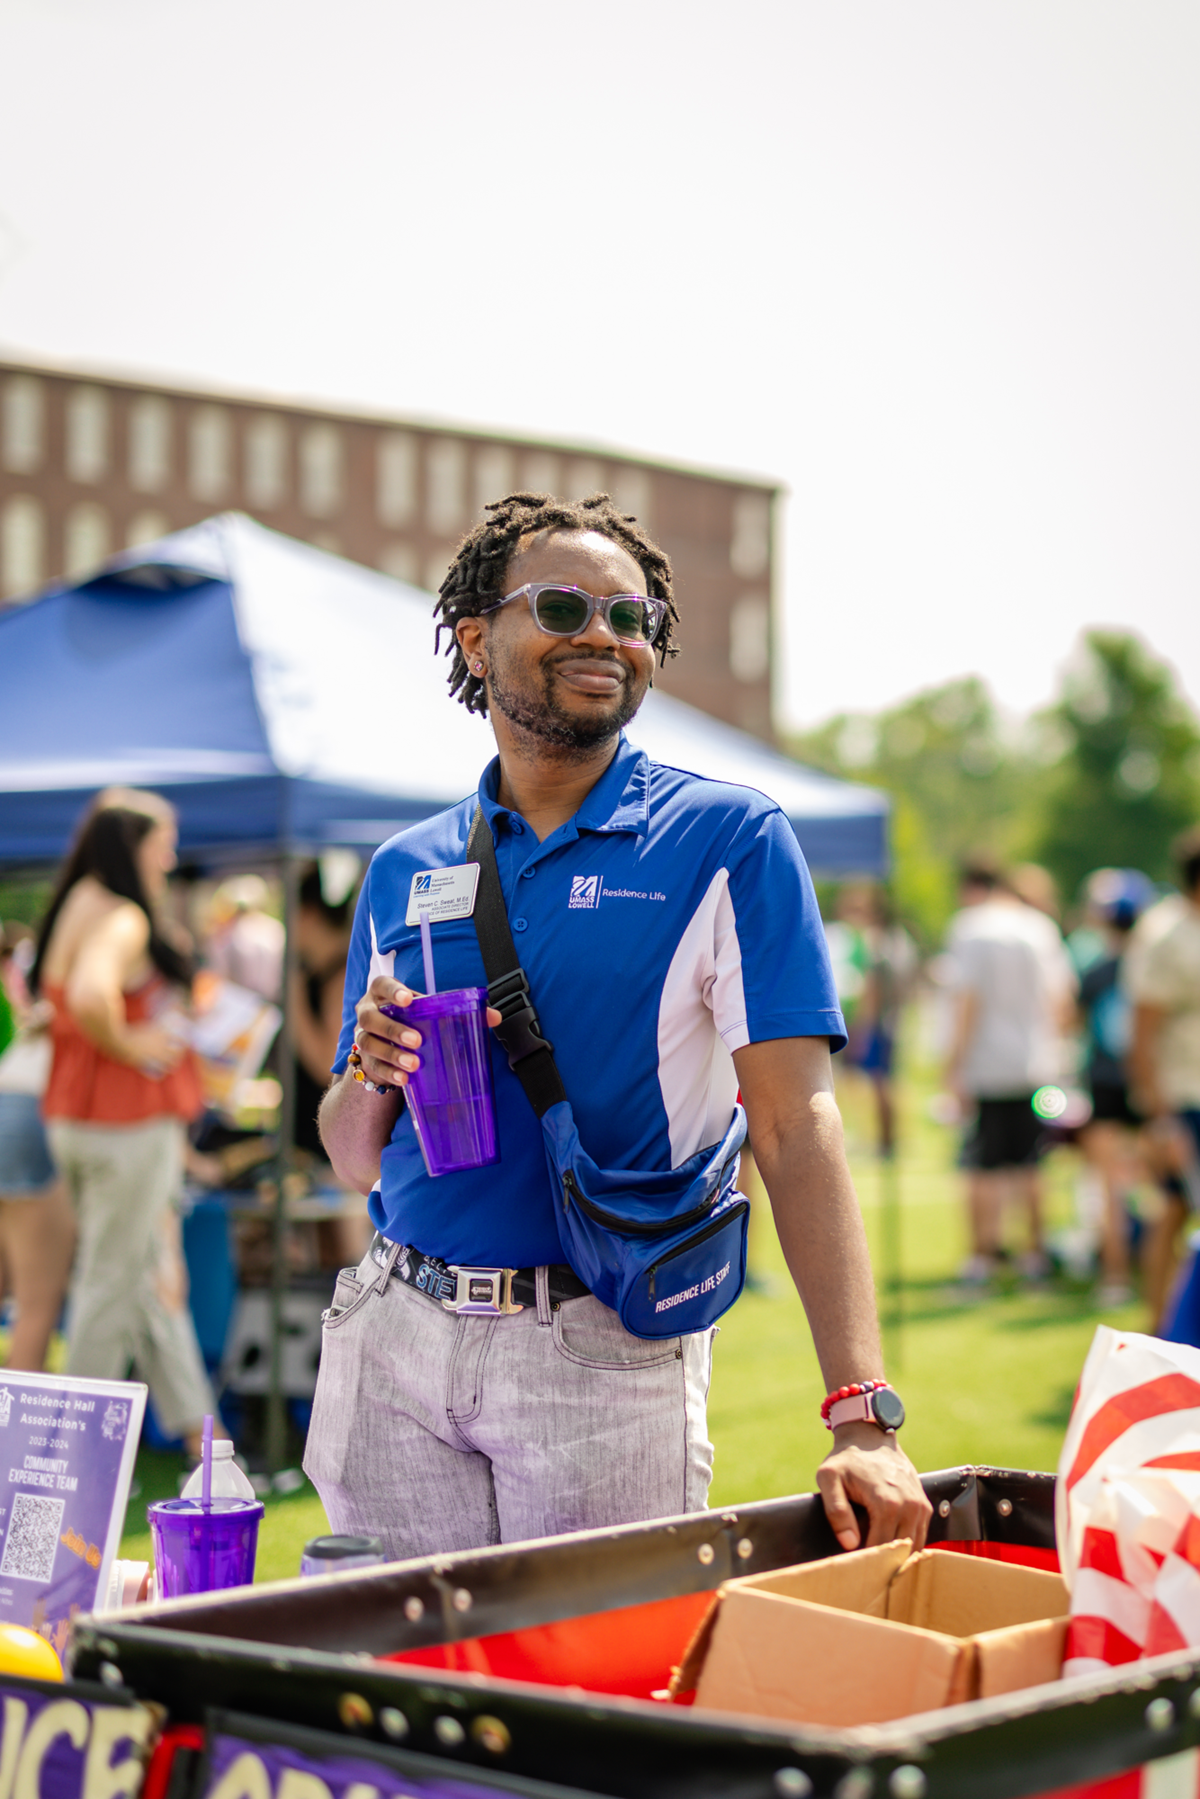 Staff standing, smiling holding a purple cup & wearing a blue UMass Lowell Residence Life shirt & Residence hall Association sling bag.